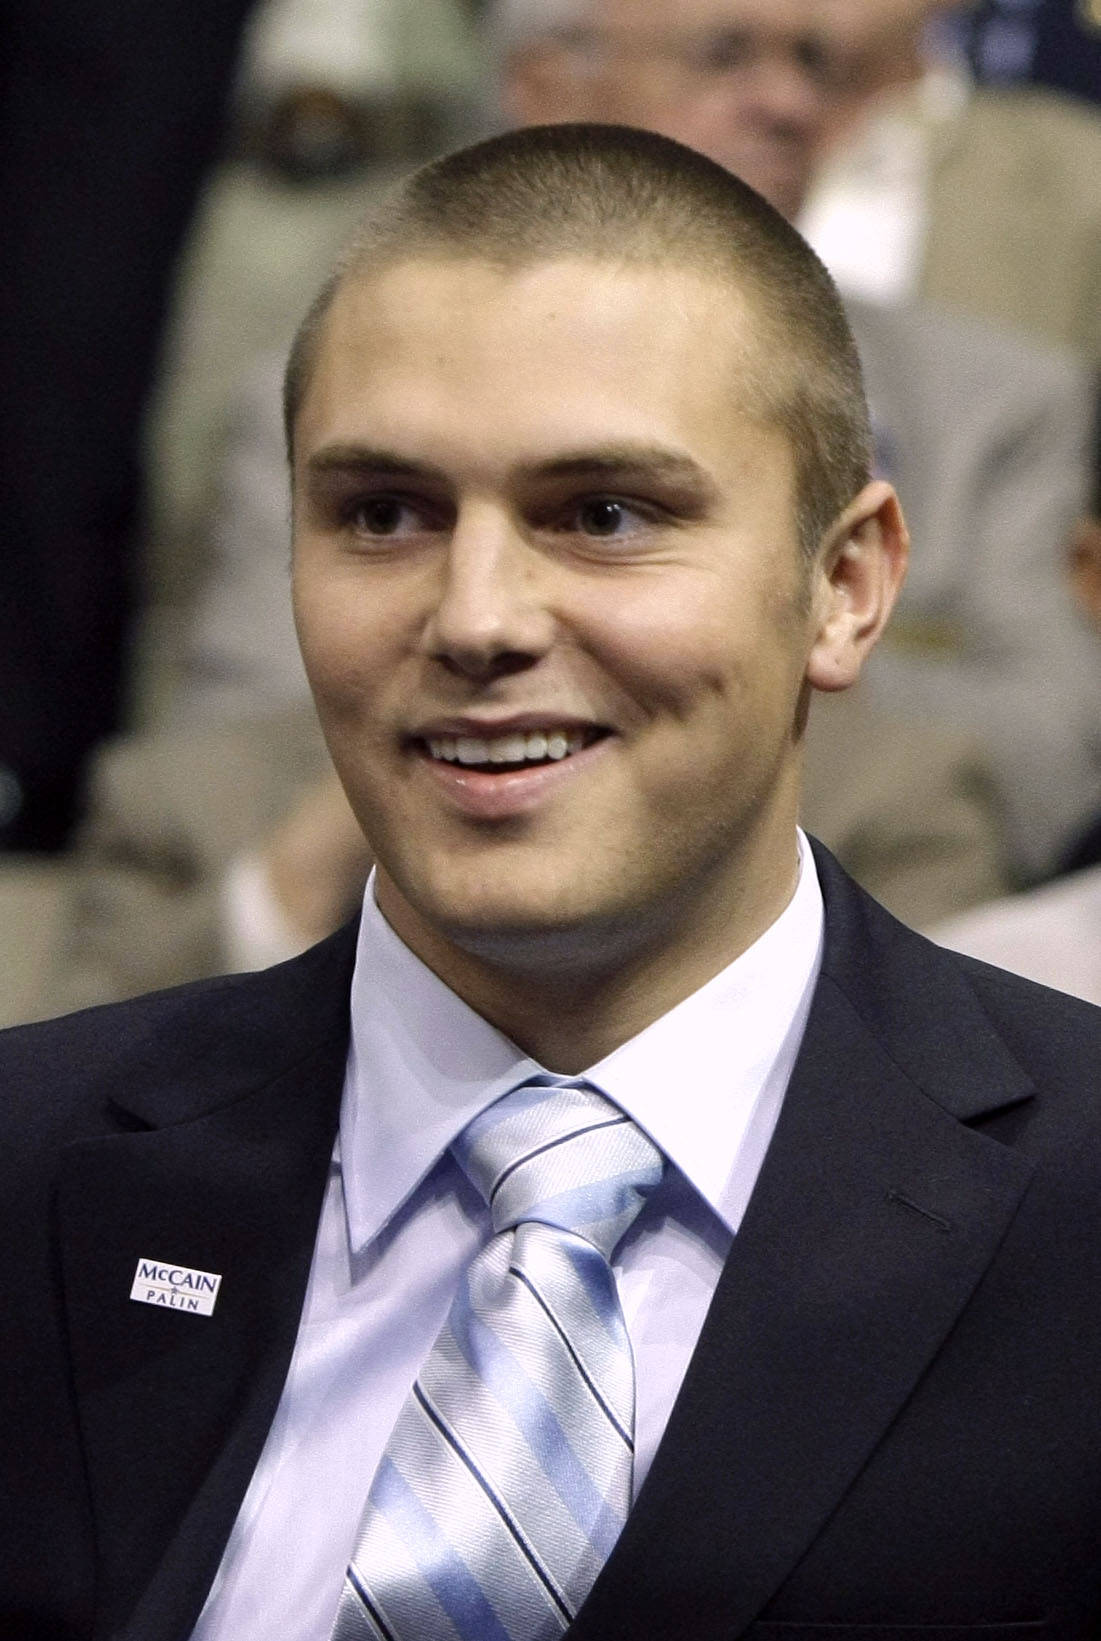 This Sept. 3, 2008 photo shows Track Palin, son of Republican vice presidential candidate Alaska Gov. Sarah Palin during the Republican National Convention in St. Paul, Minnesota. Palin, is set to appear in court Monday, Jan. 8, 2018, on charges he assaulted his father at the family’s Alaska home. (Charles Rex Arbogast | The Associated Press File)